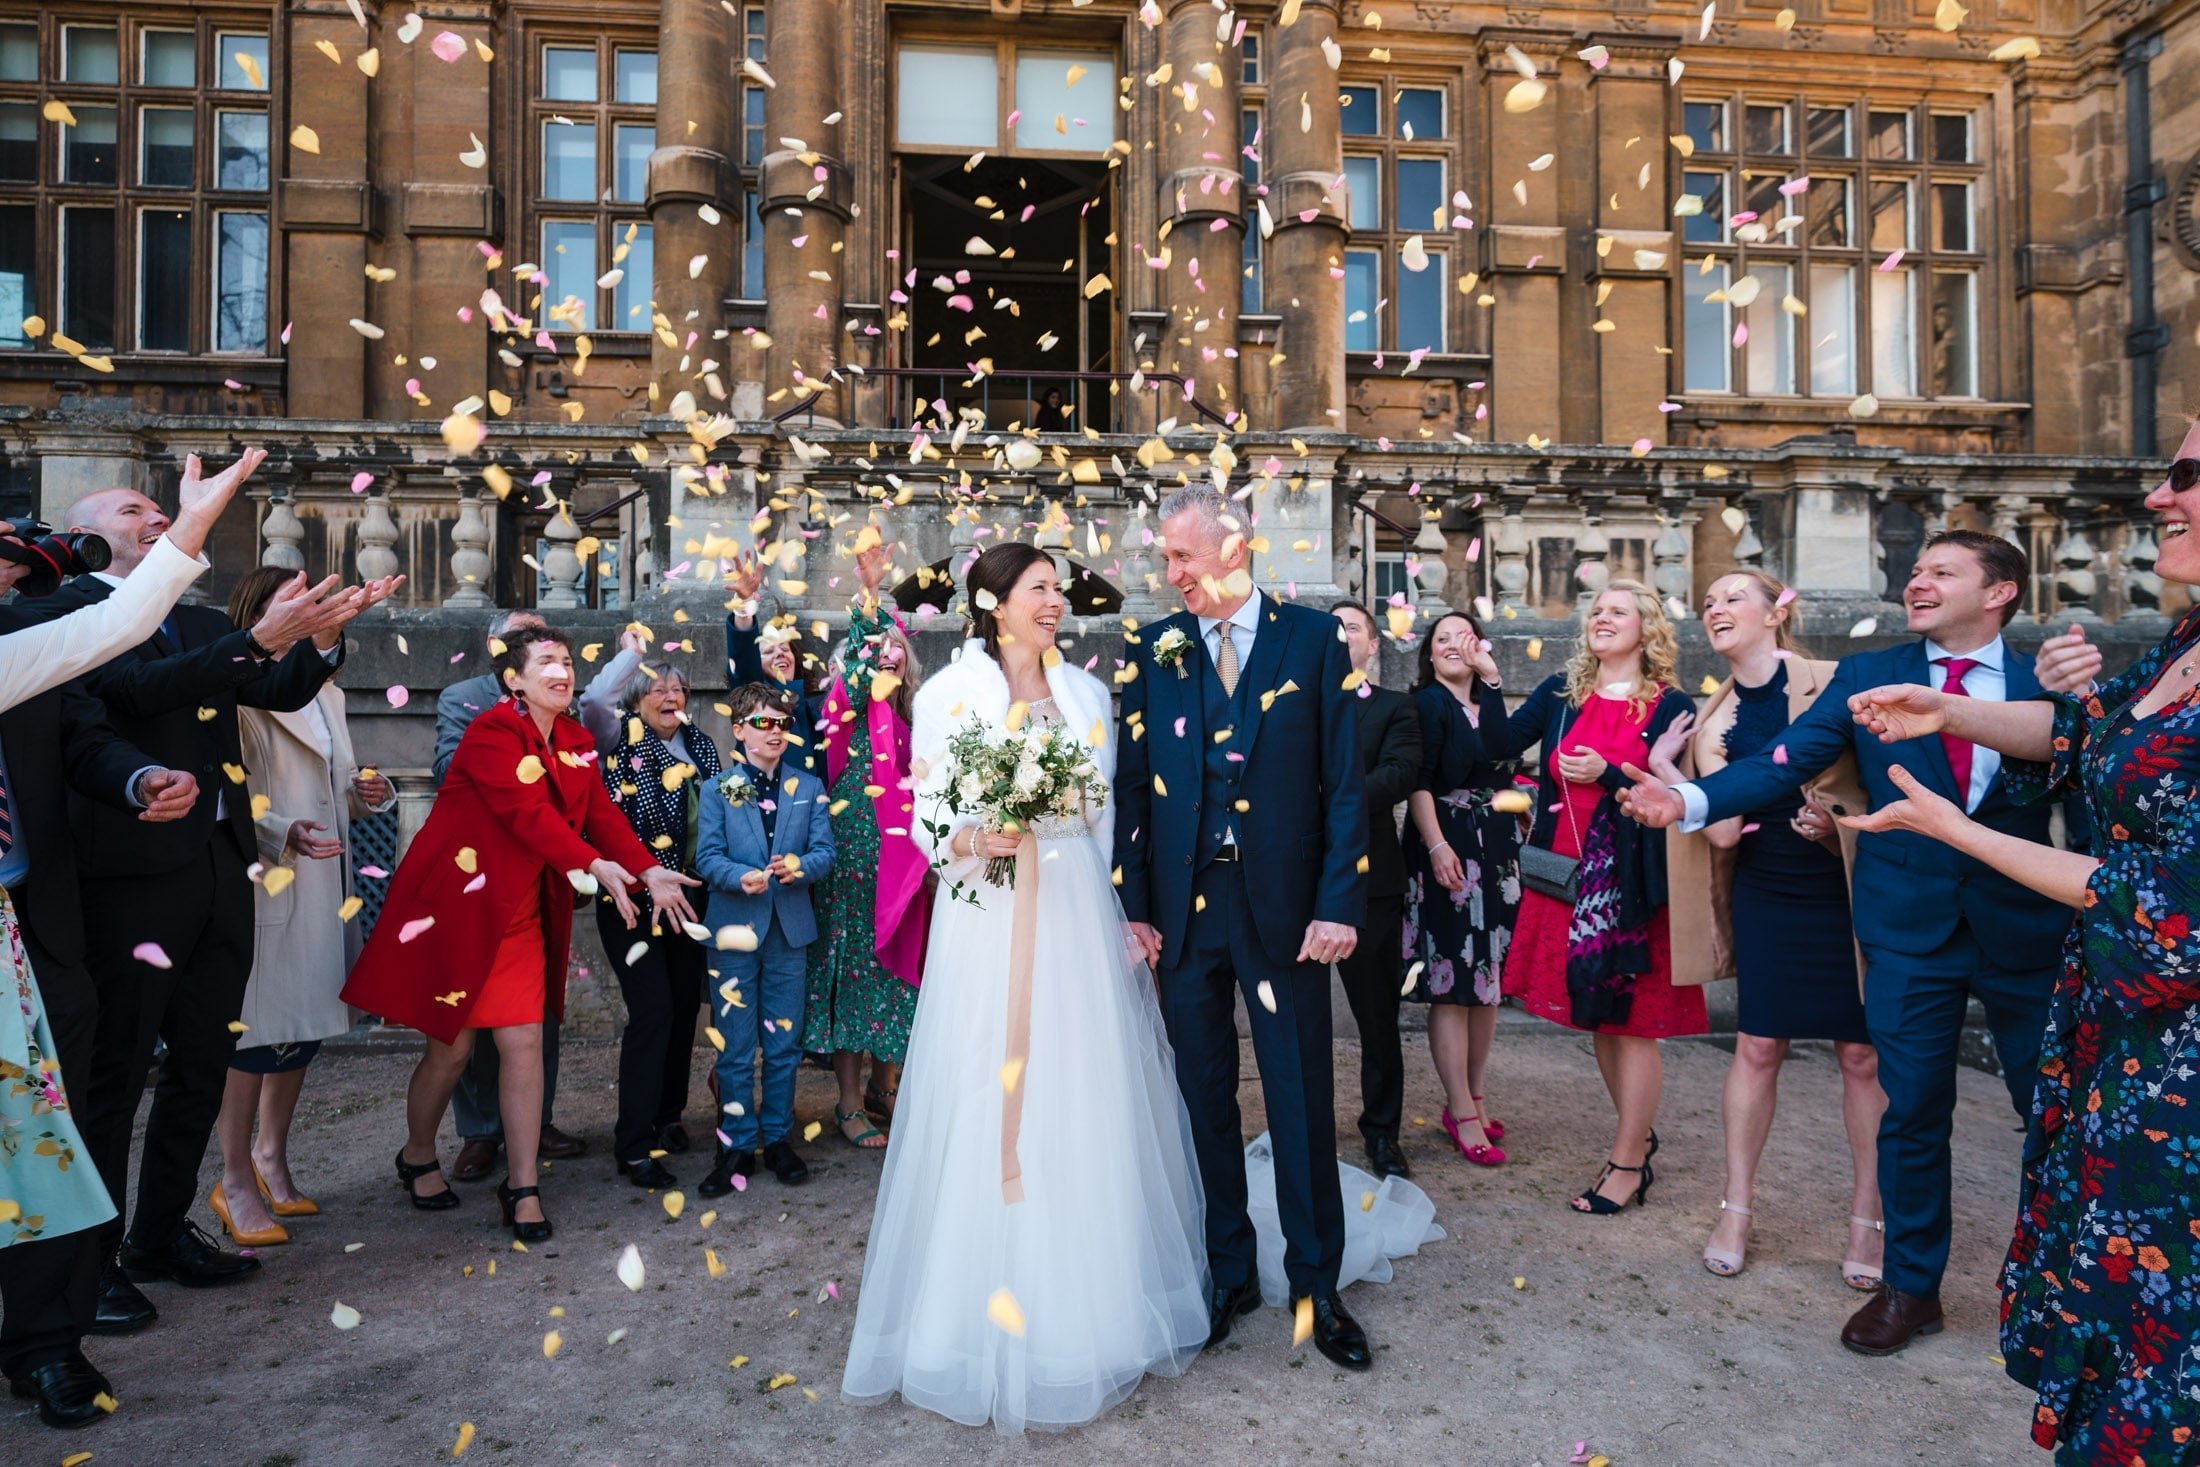 Guests throwing confetti over bride & groom outside Wollaton Hall in Nottingham